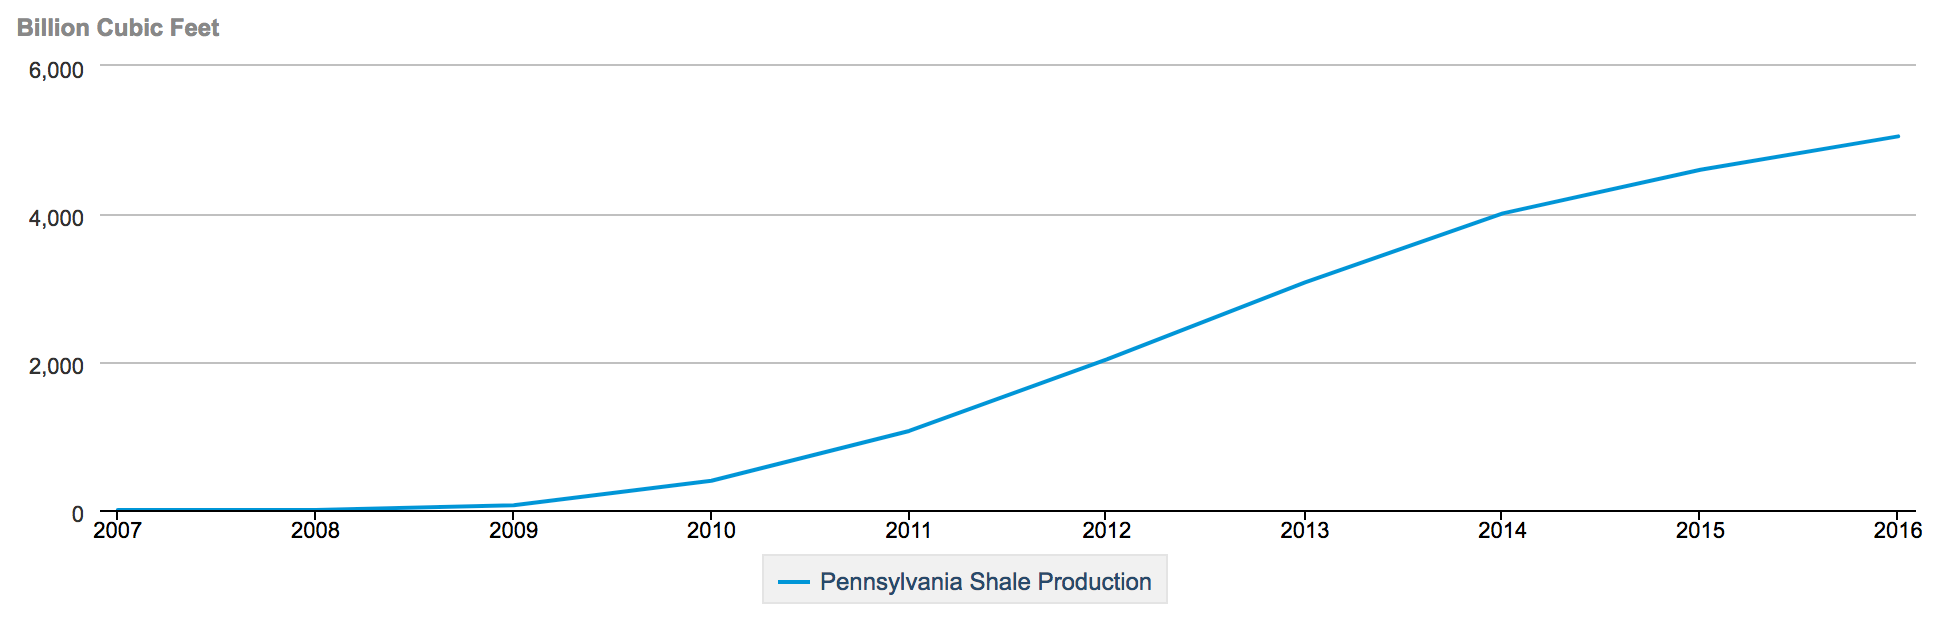 Line Graph - Billion Cubic Feet of Pennsylvania Shale Production continues to go up from 2007 to 2016